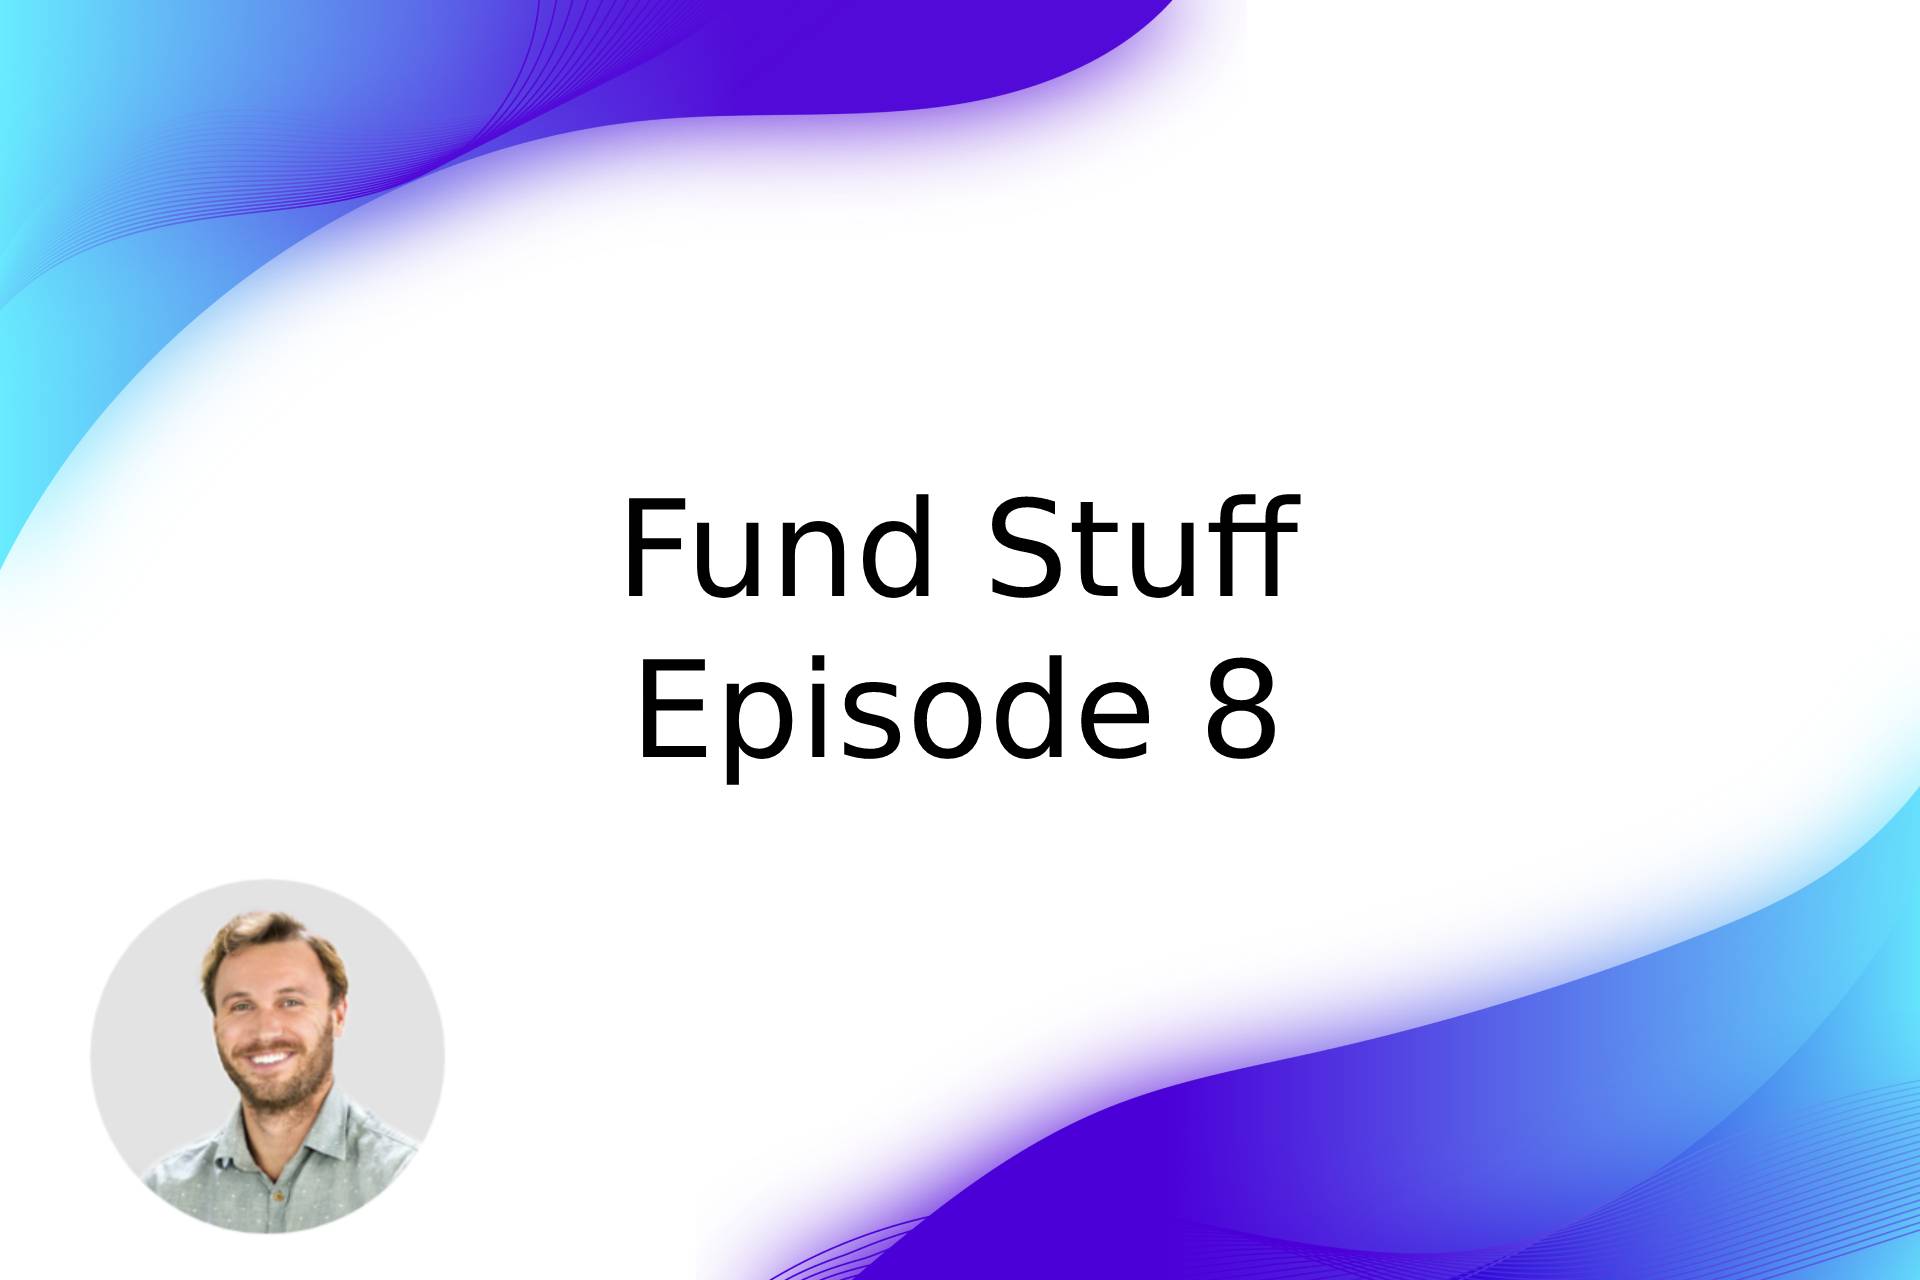 Fund Stuff Ep 6 - Dominic Wells From Onfolio